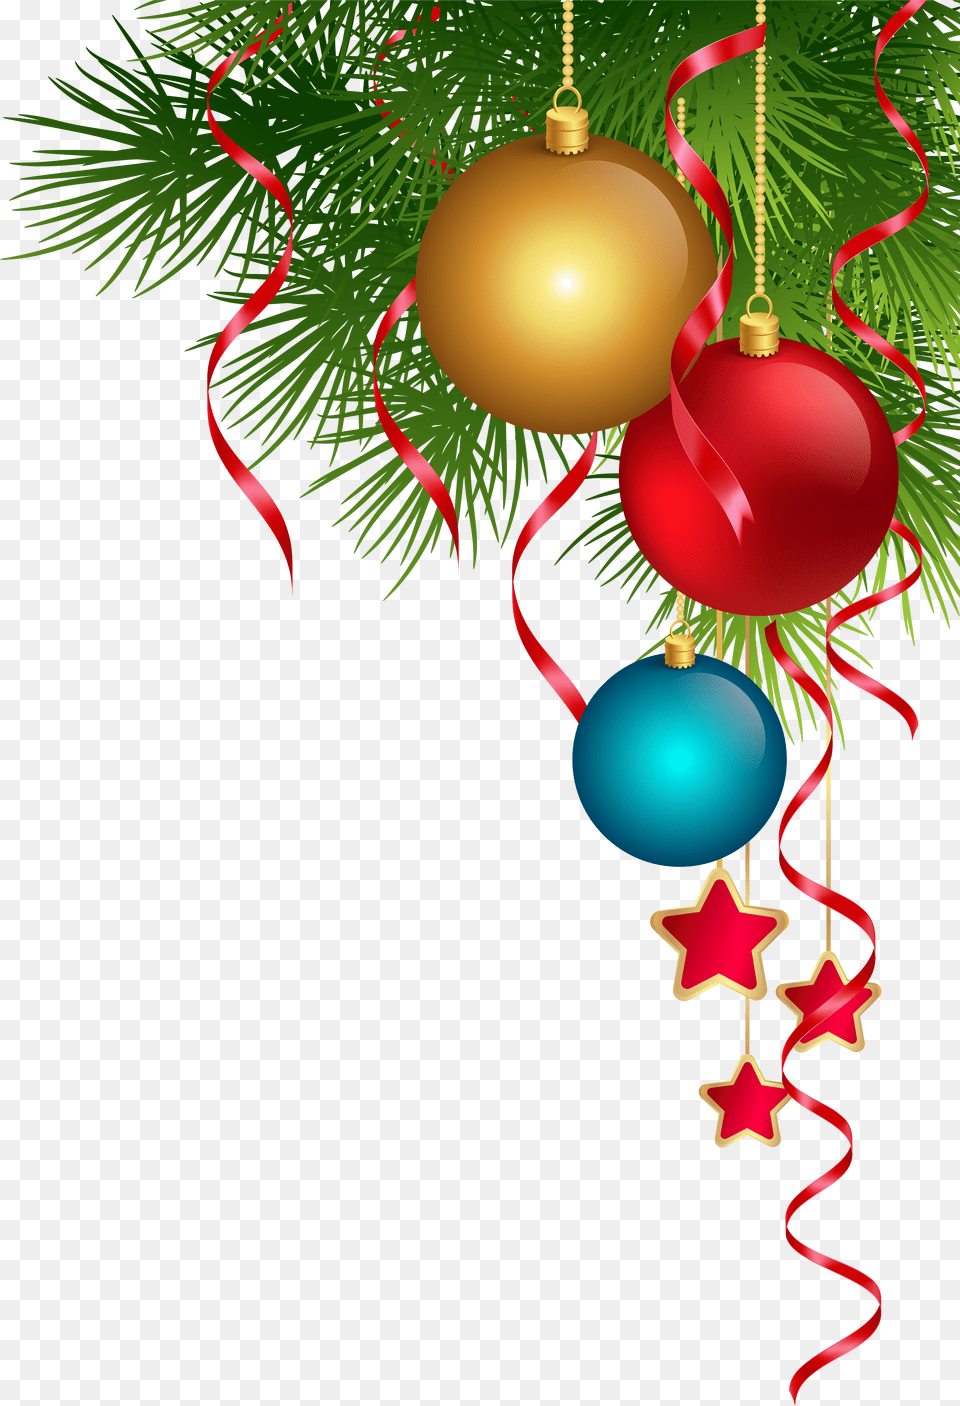 Christmas Ornaments Clipart Backgrounds Free Transparent Png